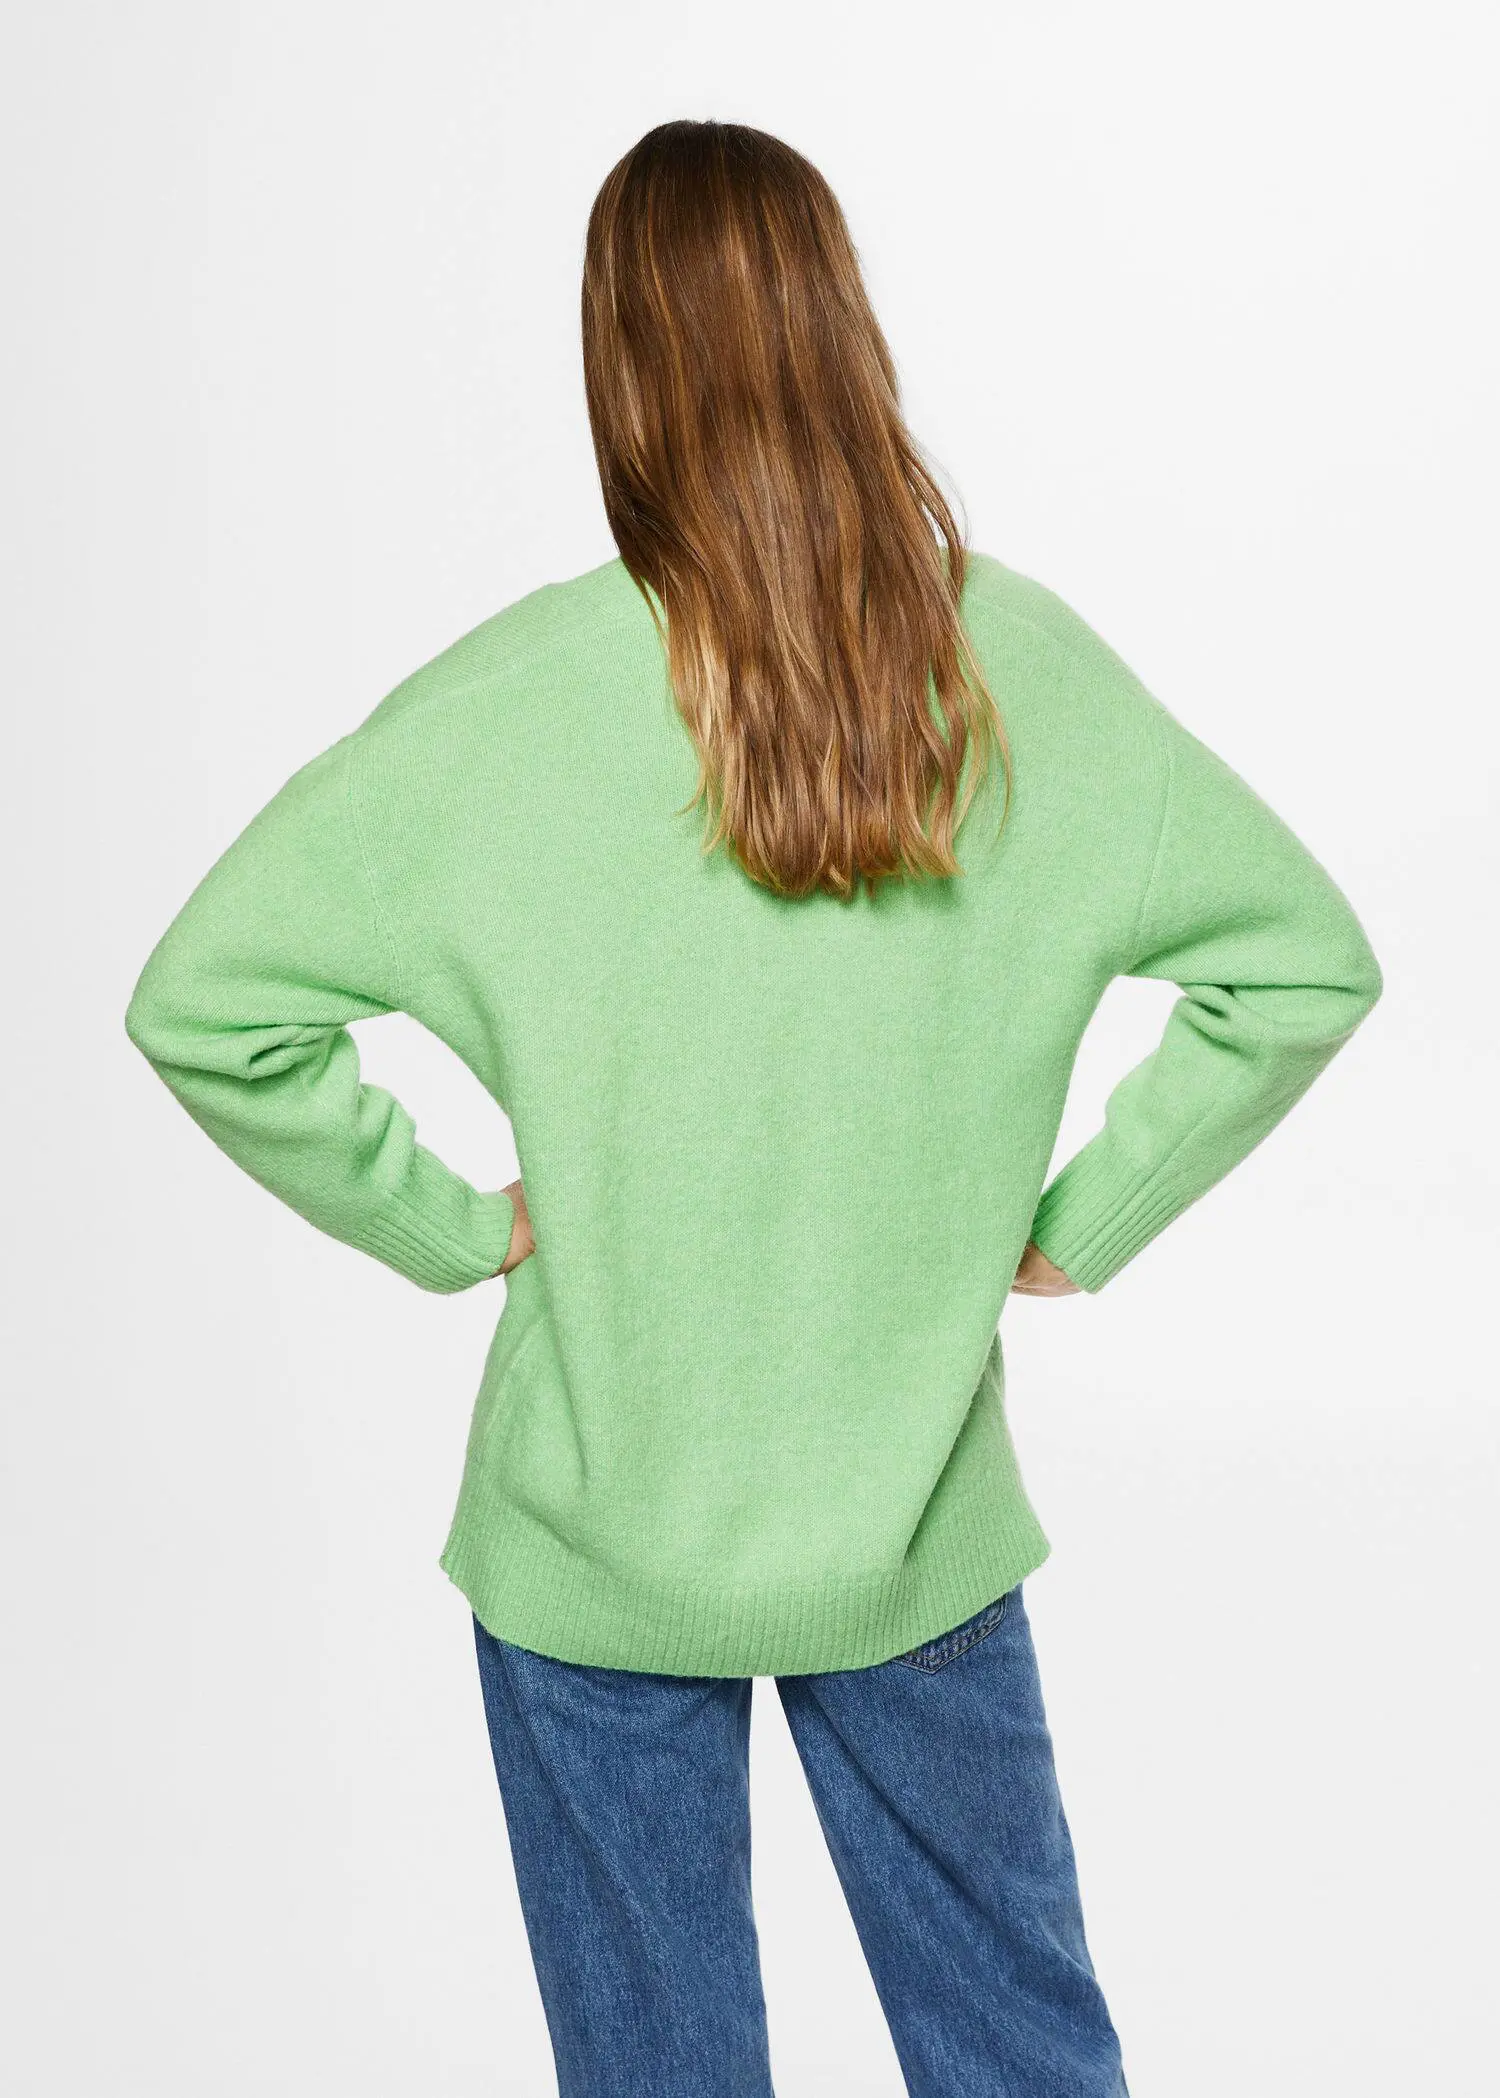 Mango V-neck sweater. a woman standing with her hands on her hips. 